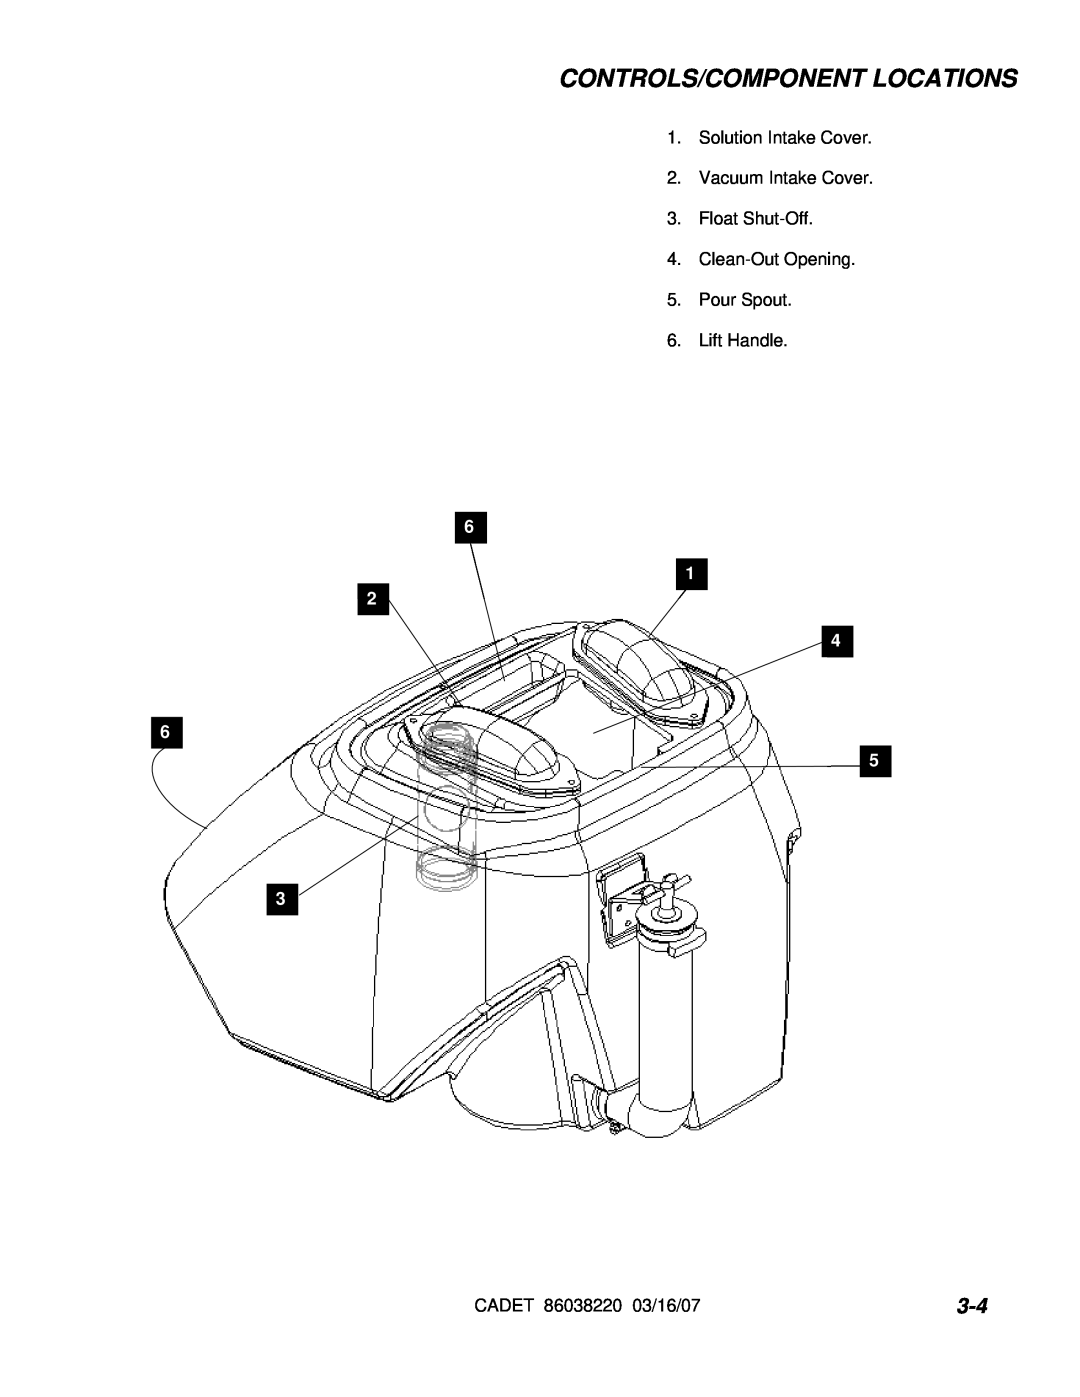 Windsor cdt7 10080220 manual Controls/Component Locations, Solution Intake Cover 2. Vacuum Intake Cover 3. Float Shut-Off 